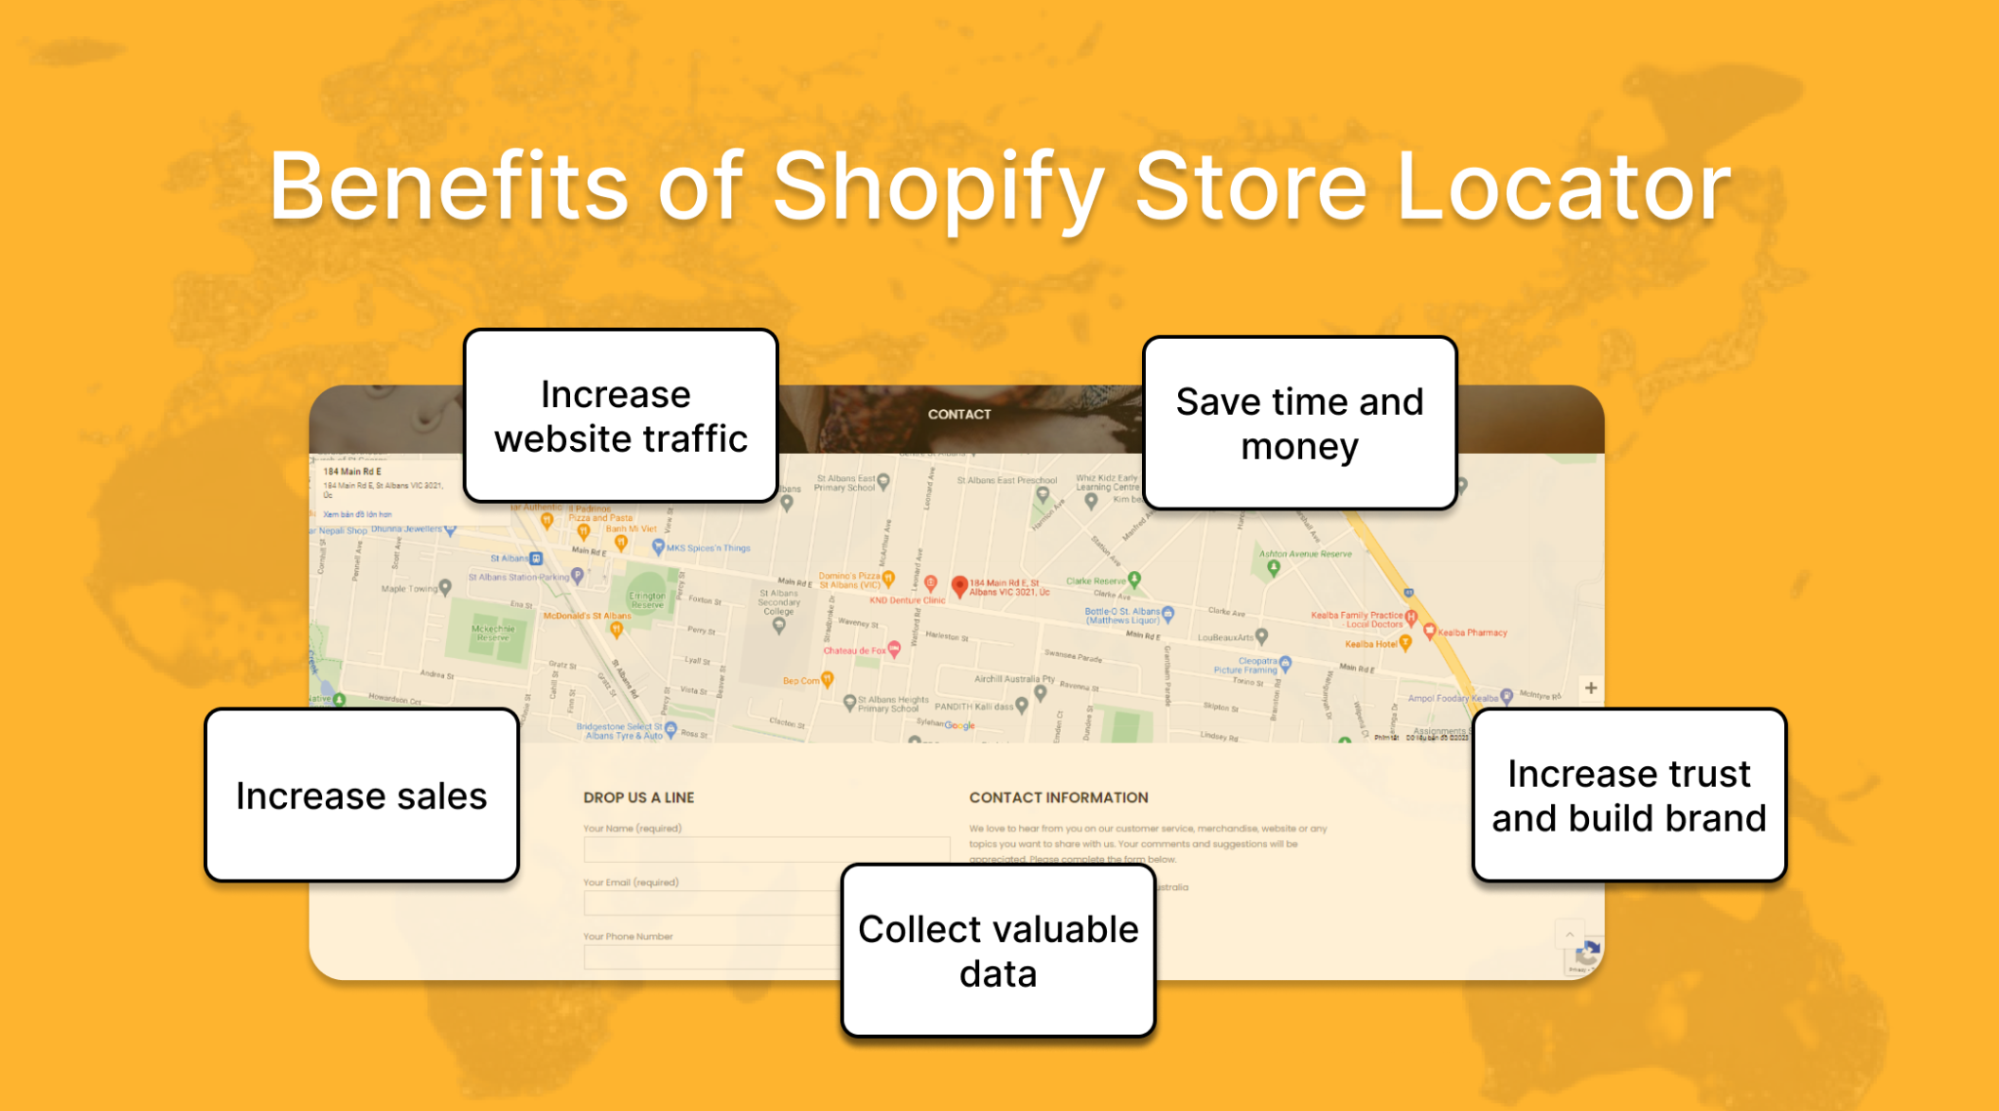 Benefits of Shopify Store Locator